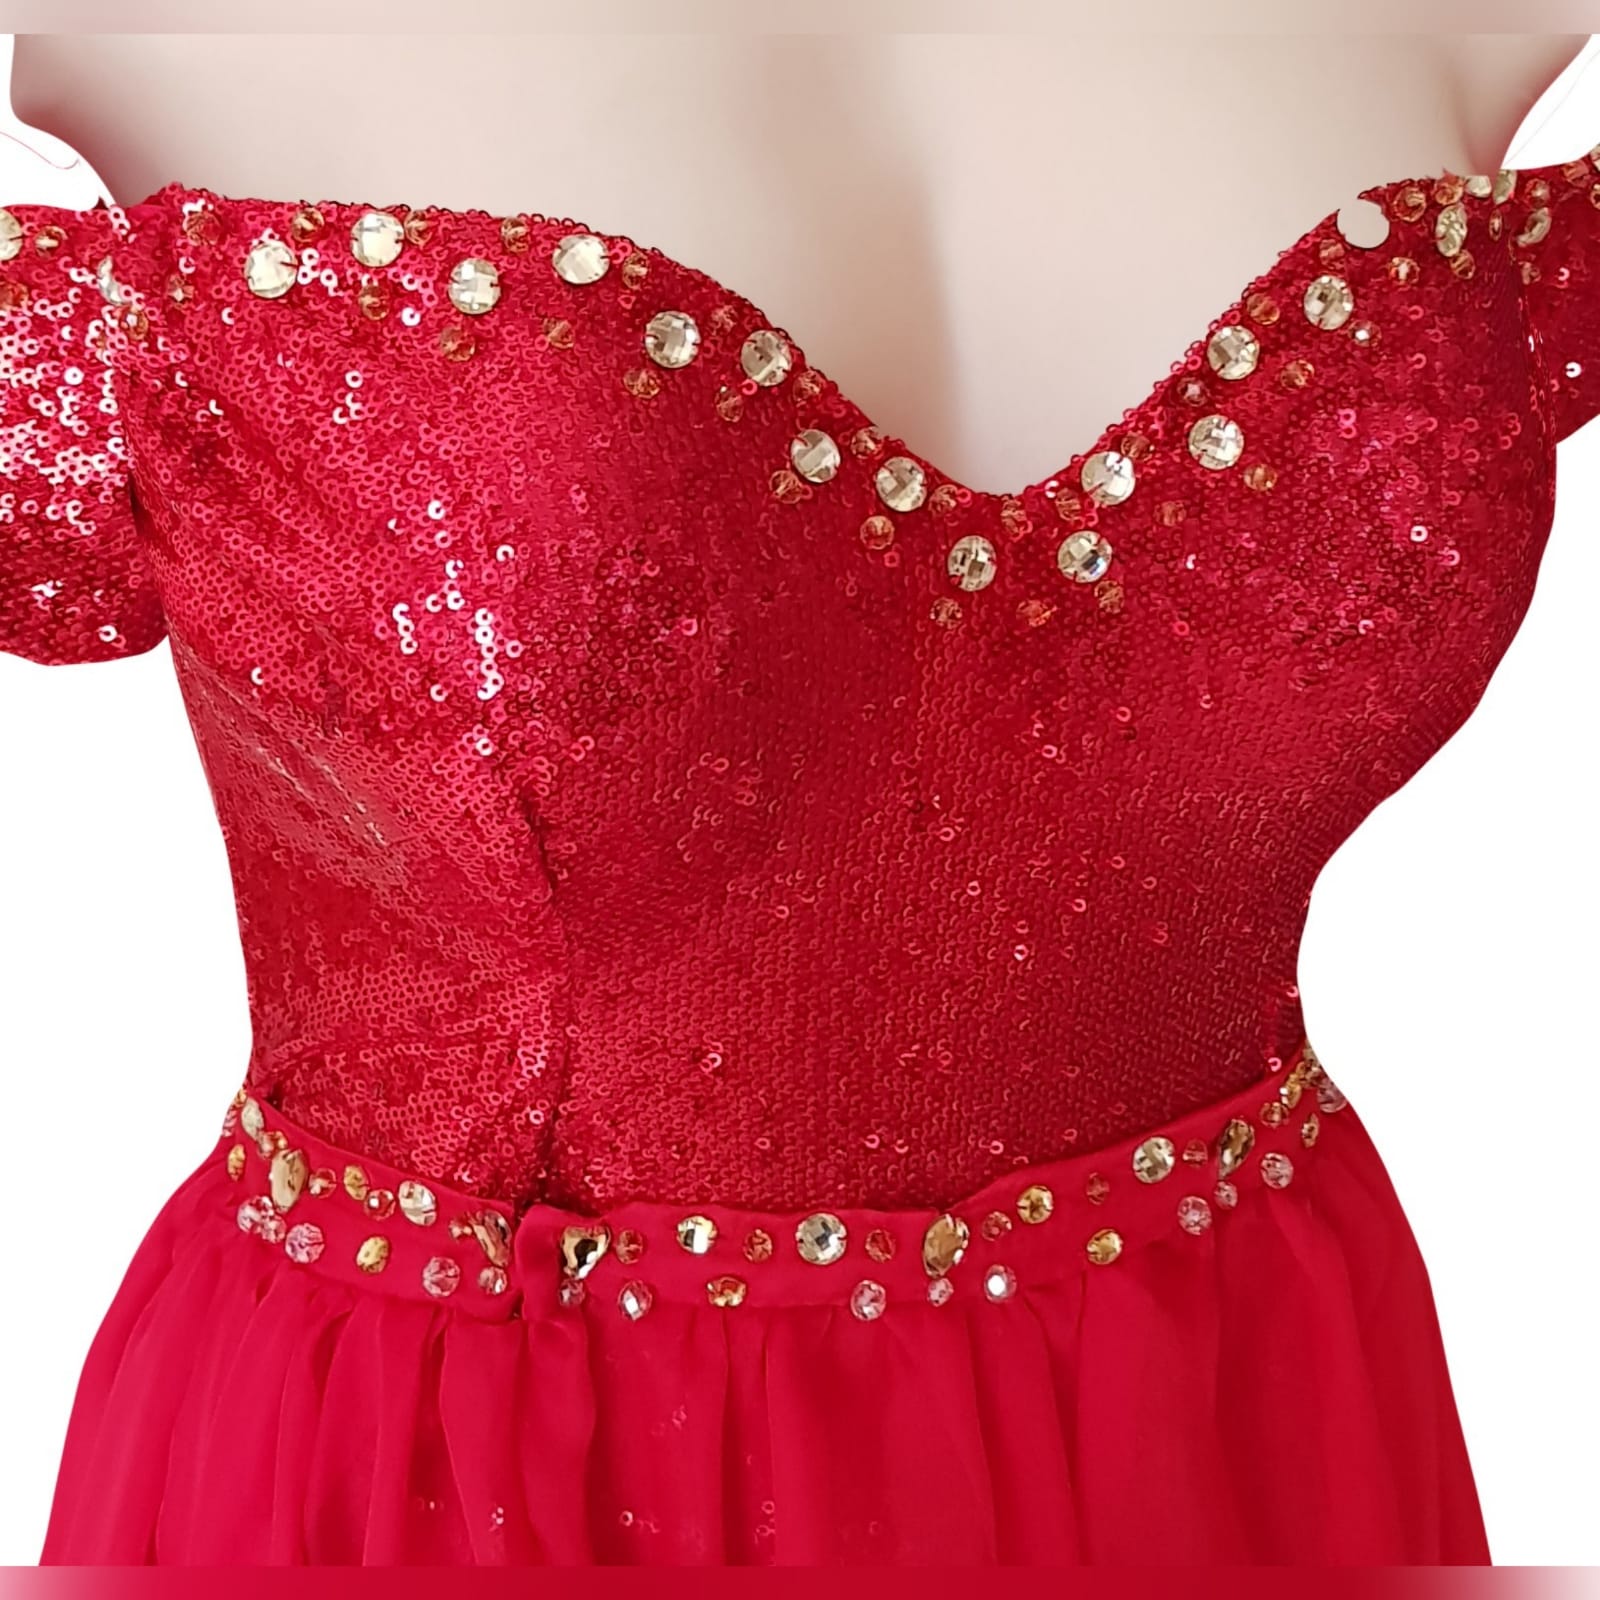 2 piece red sequins evening dress 4 2 piece red sequins evening dress. Short leg off shoulder sweetheart neckline bodysuit with a sheer long detachable skirt with 2 slits. Detailed with gold beads.